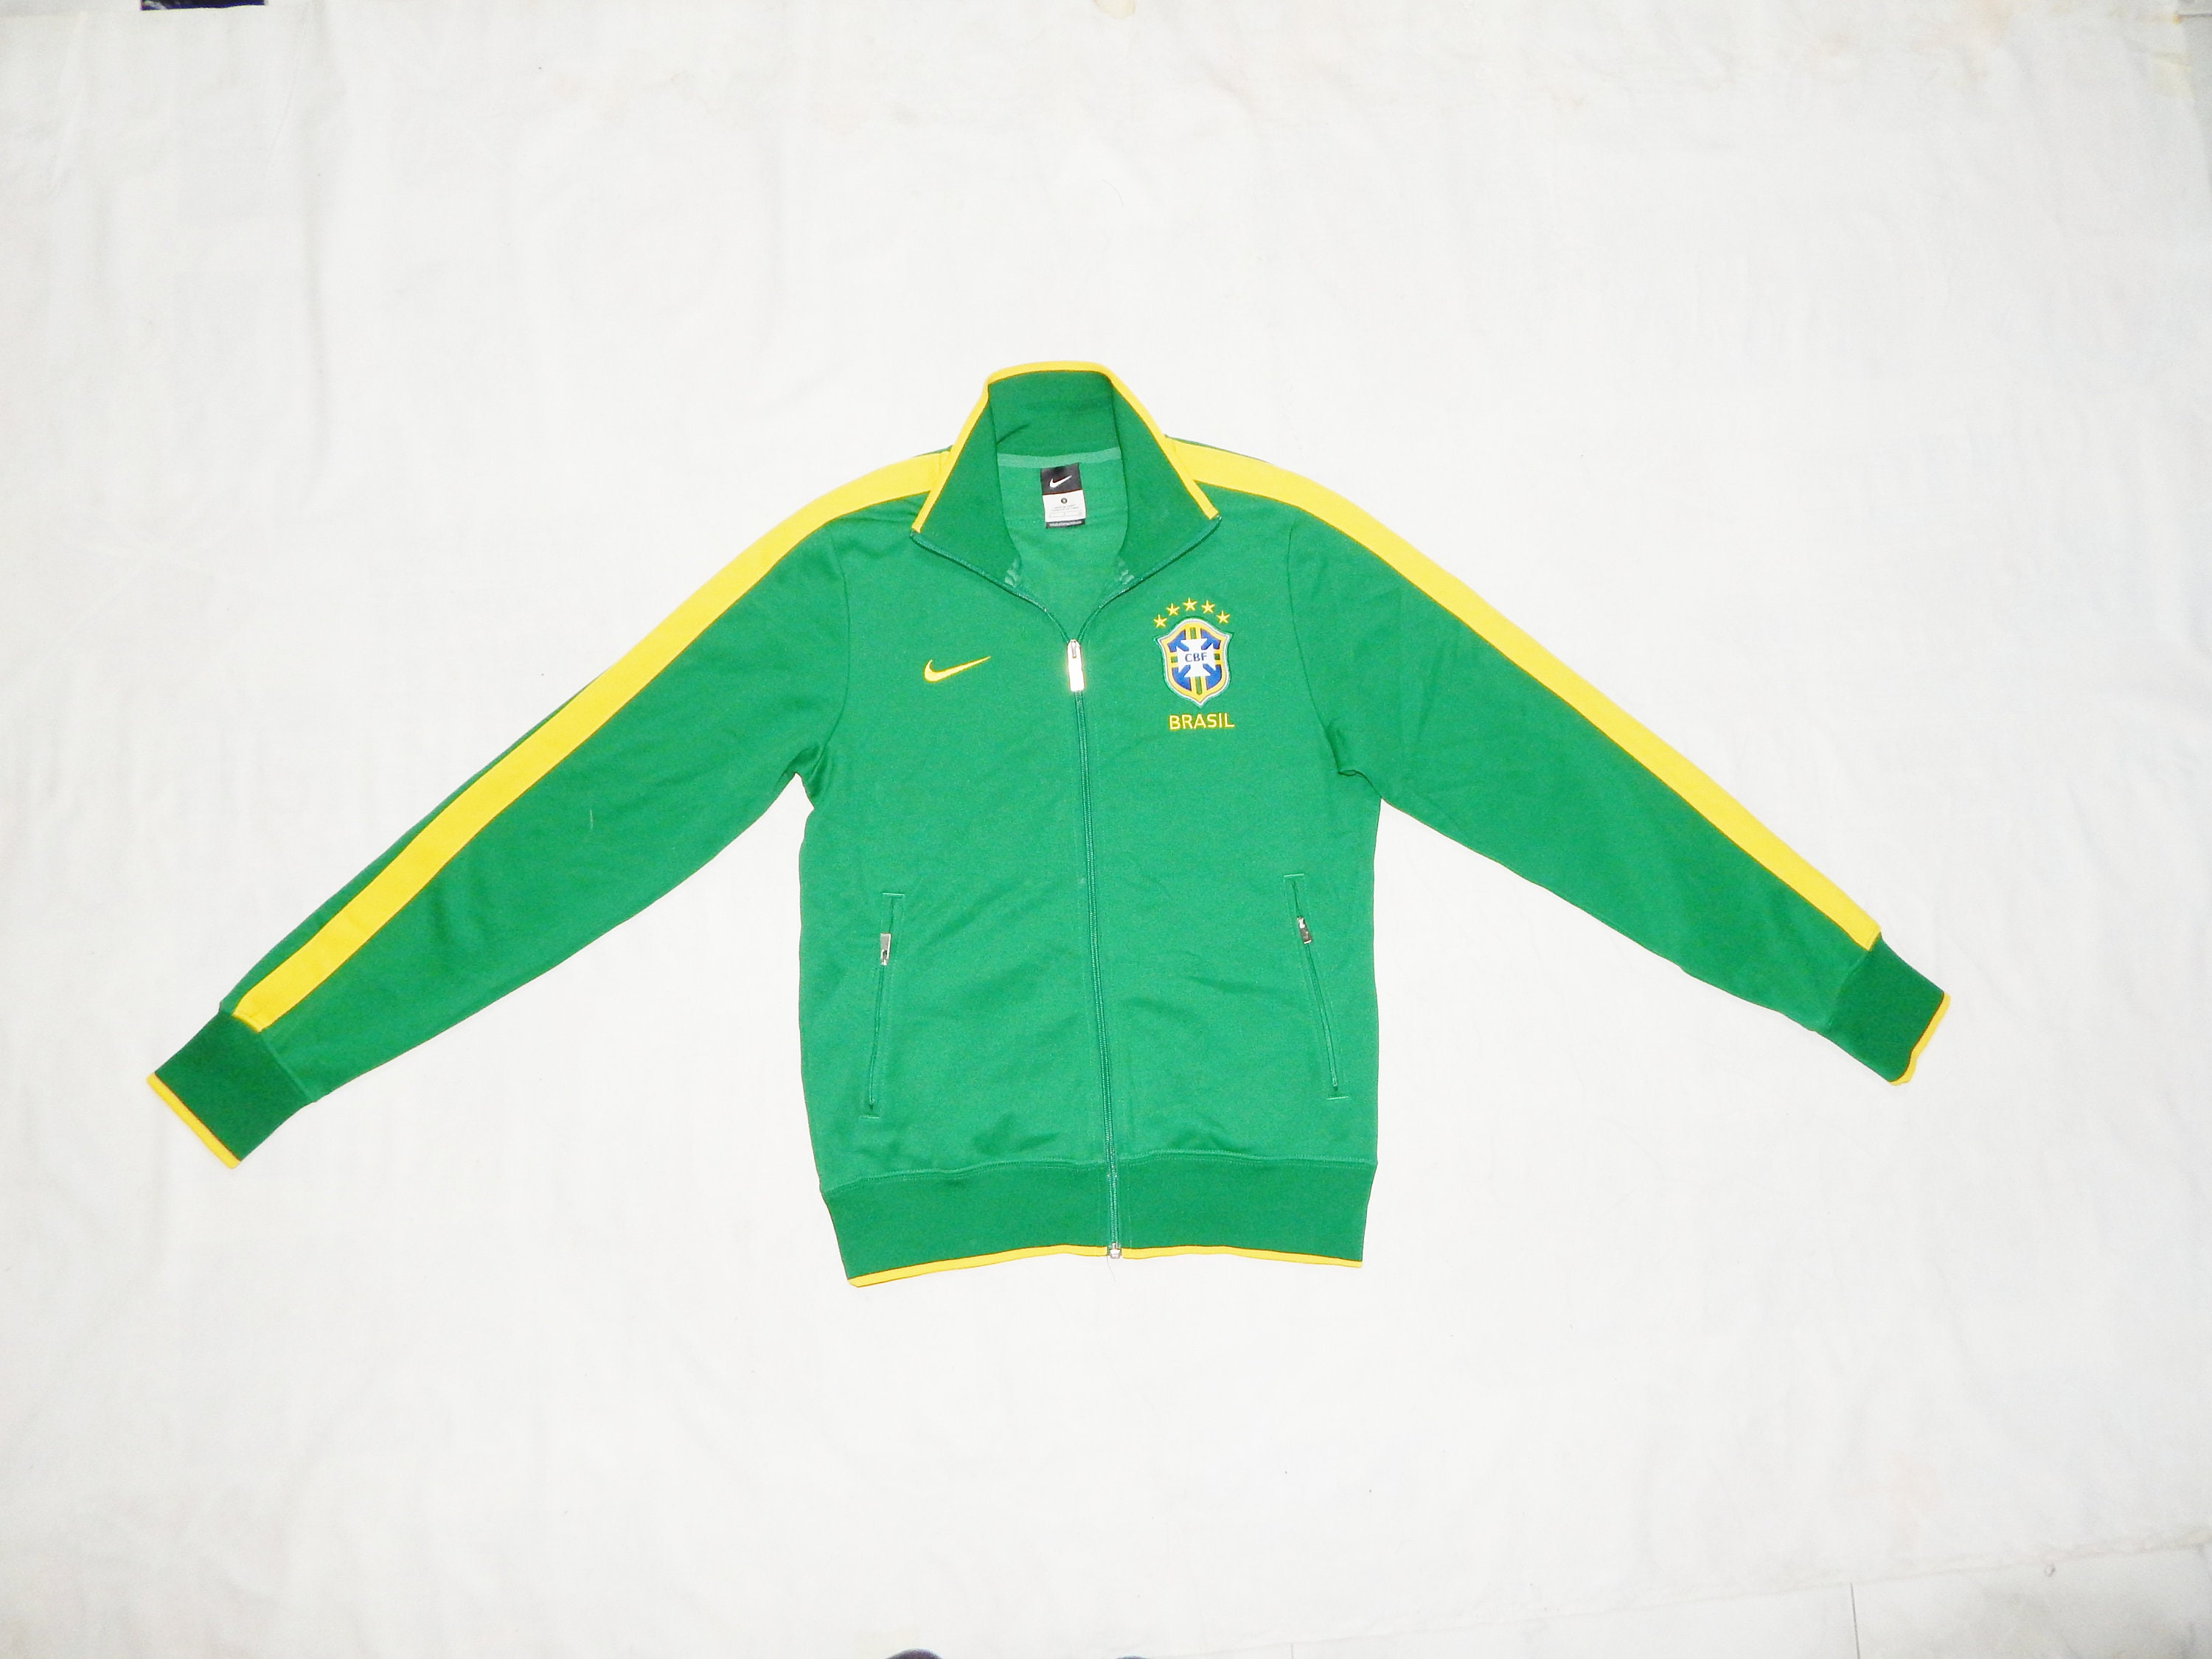 Nike Brasil Vintage Official Adult's Football Team Tracksuit Top Jacket ,  Size S, Green/Yellow